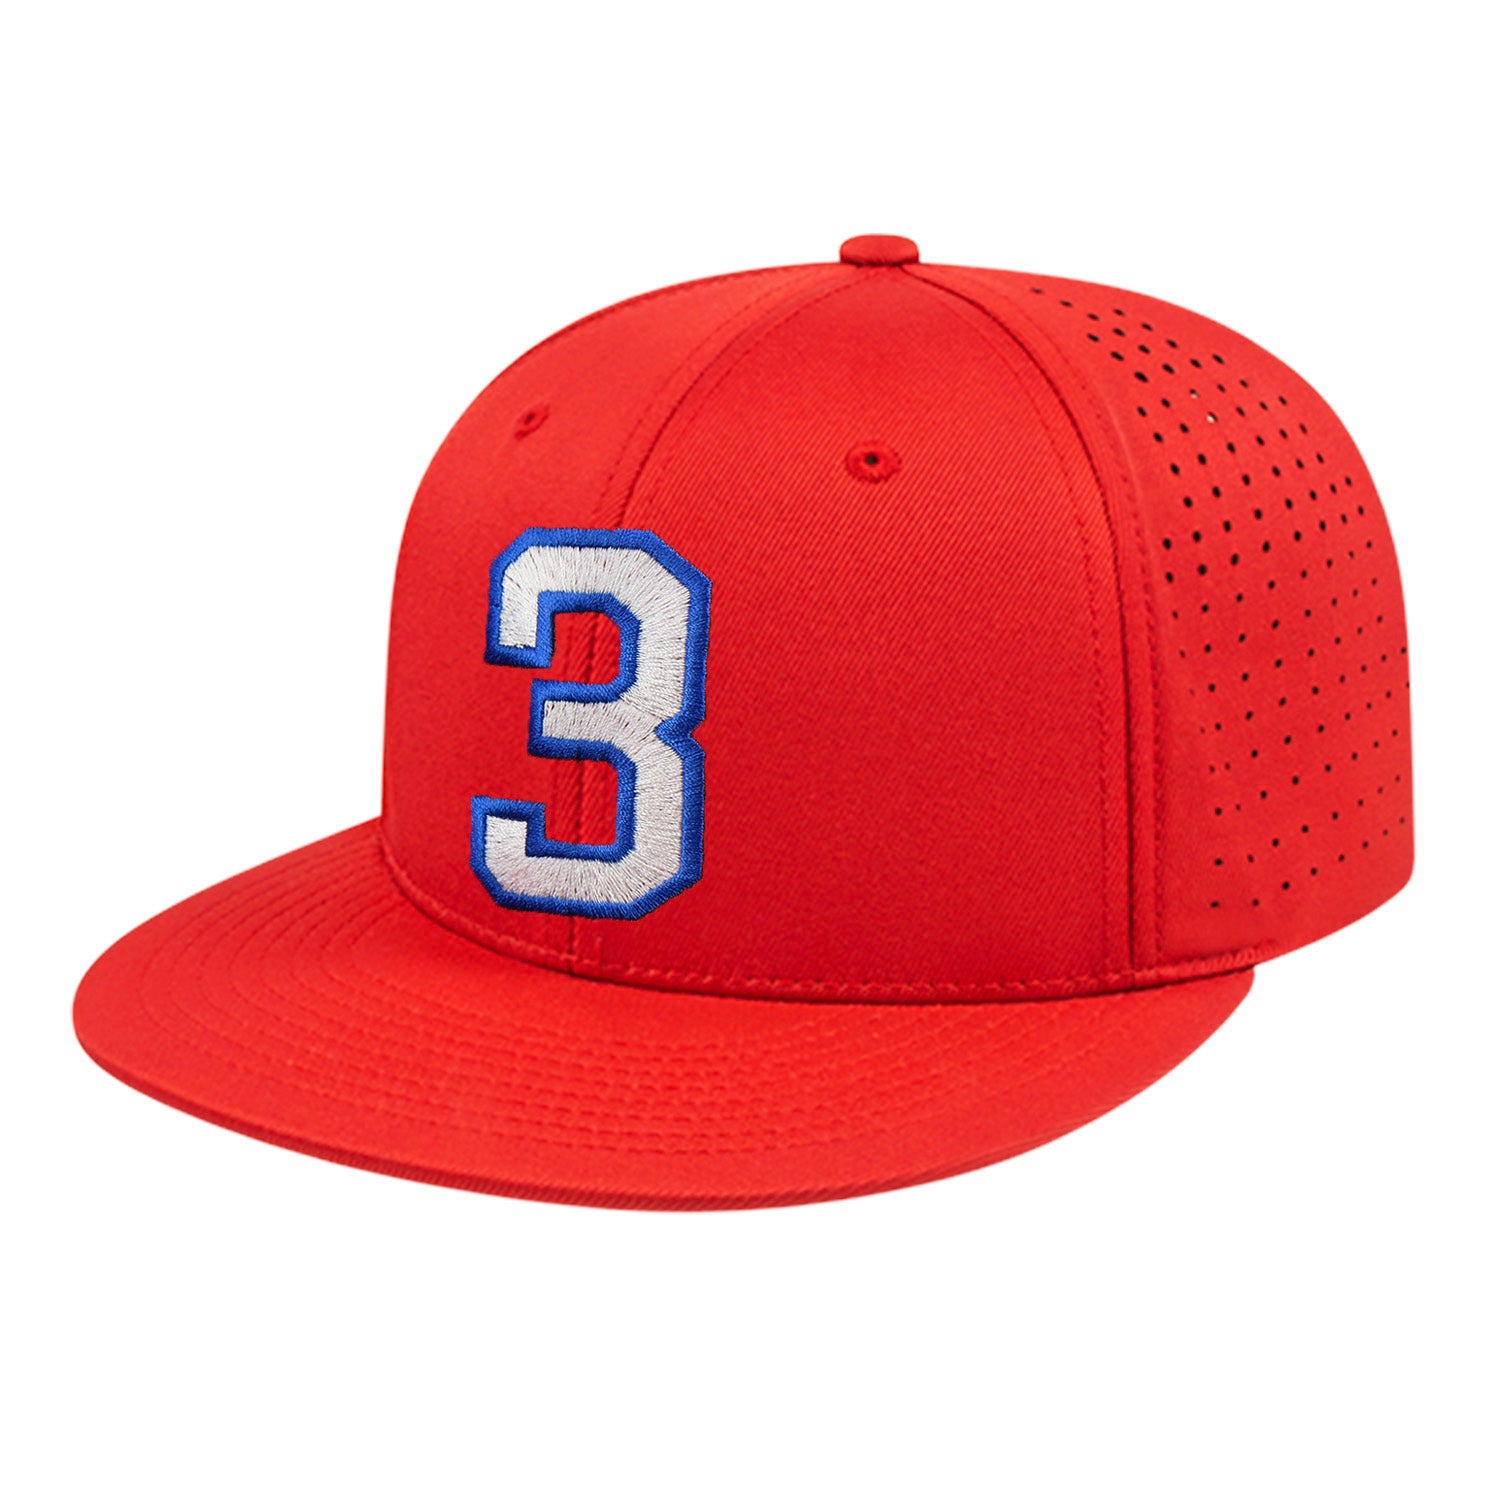 Damar Fundraiser #3 - Fitted Hat - Red